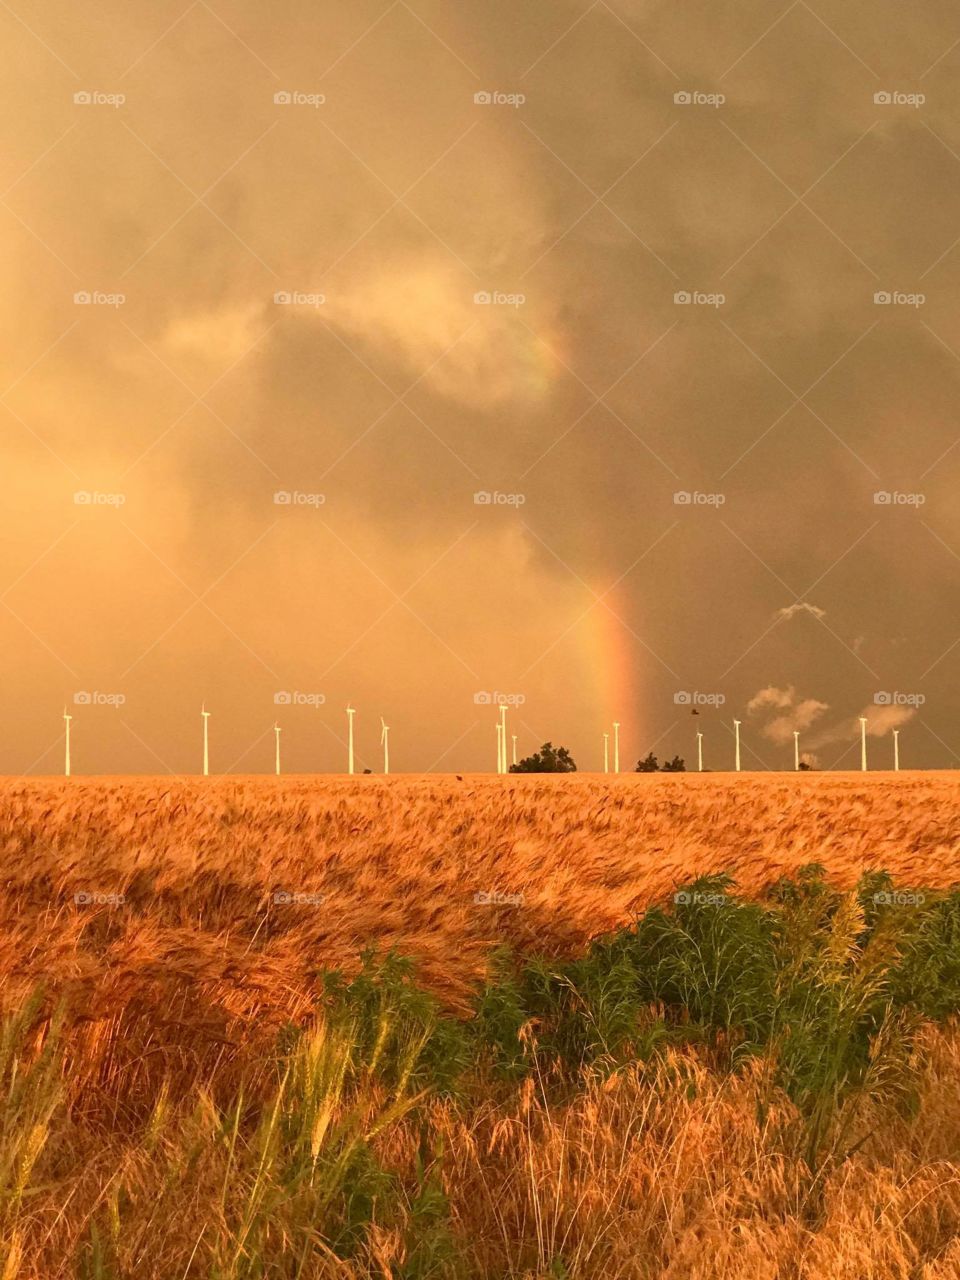 Kansas wheat fields blowing in the wind with a rainbow in the sky